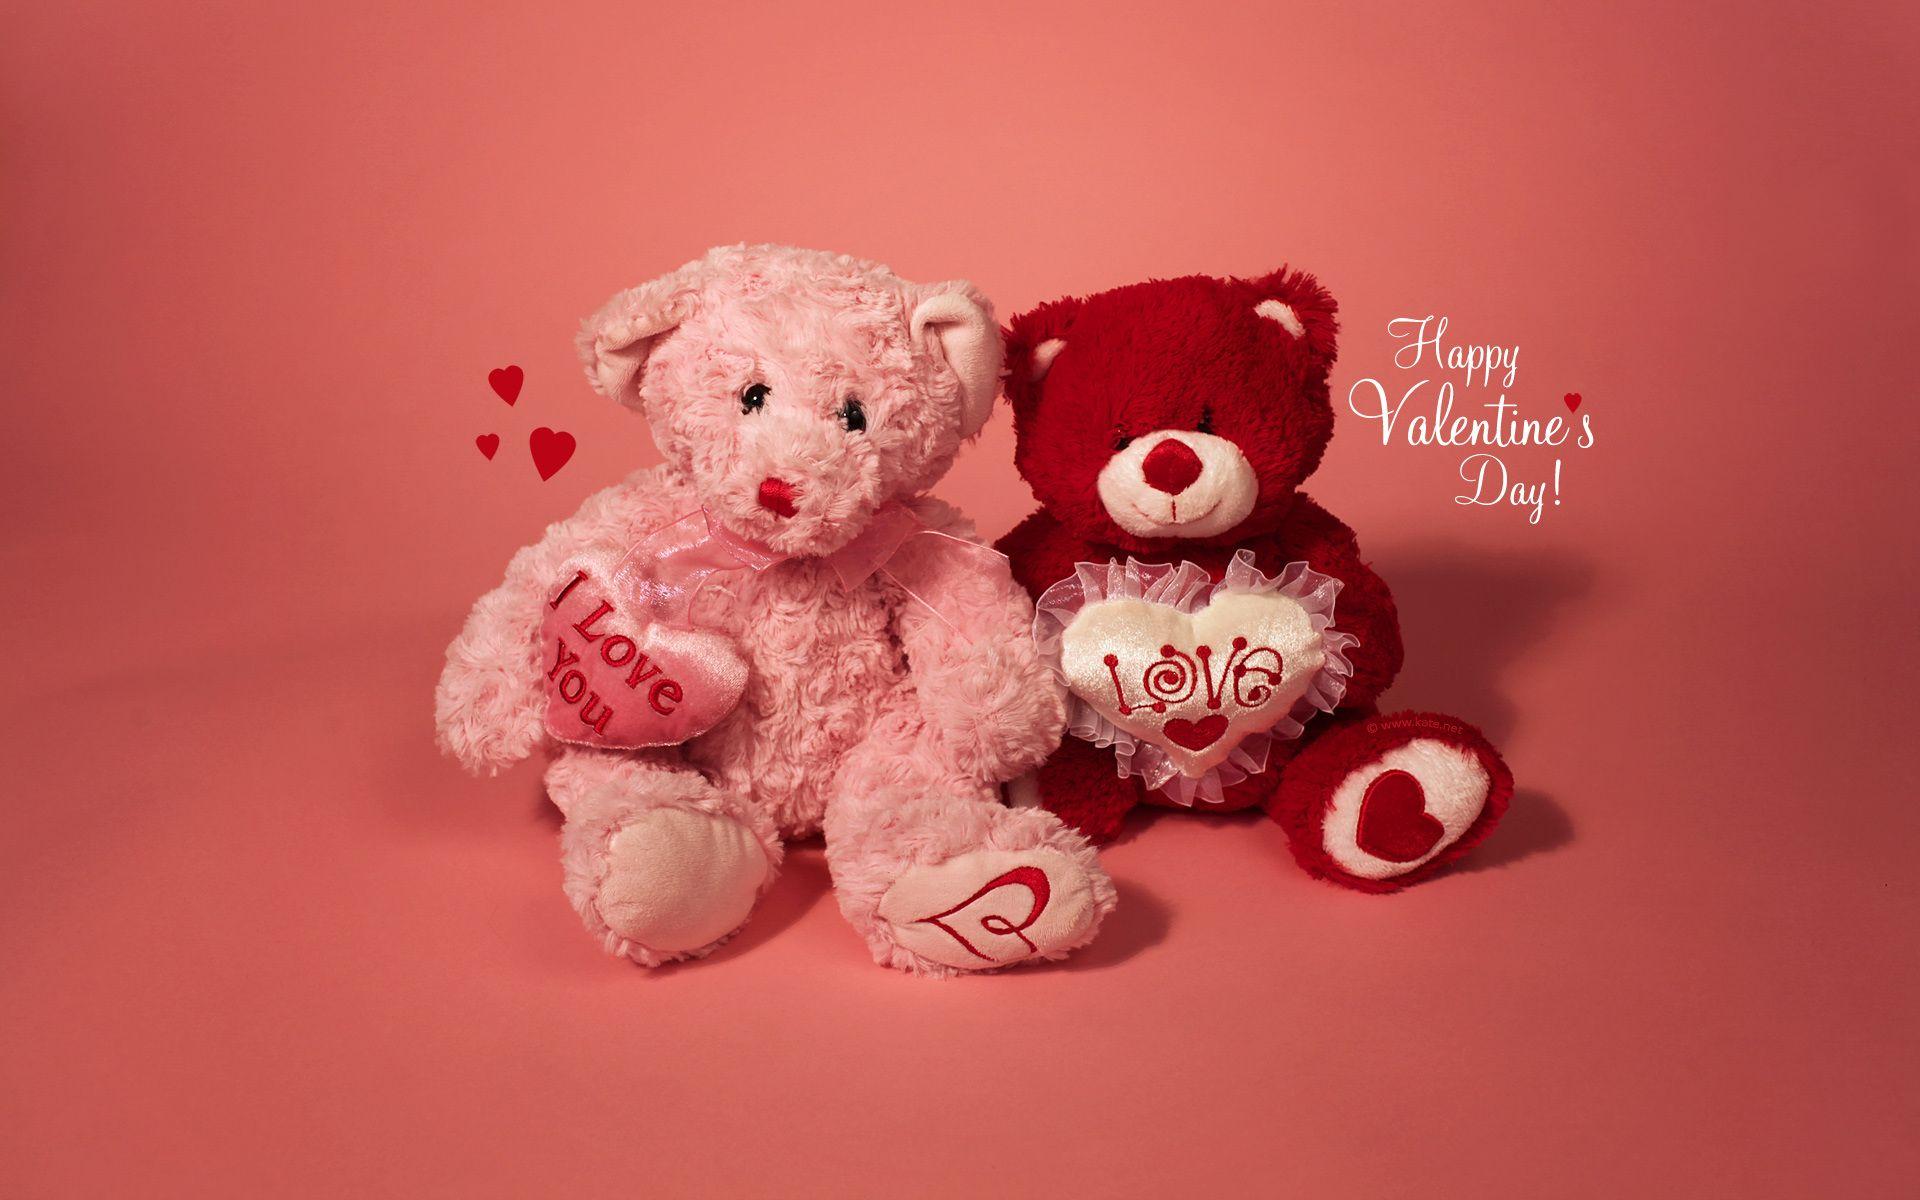 Teddy Day Wallpapers - Wallpaper Cave